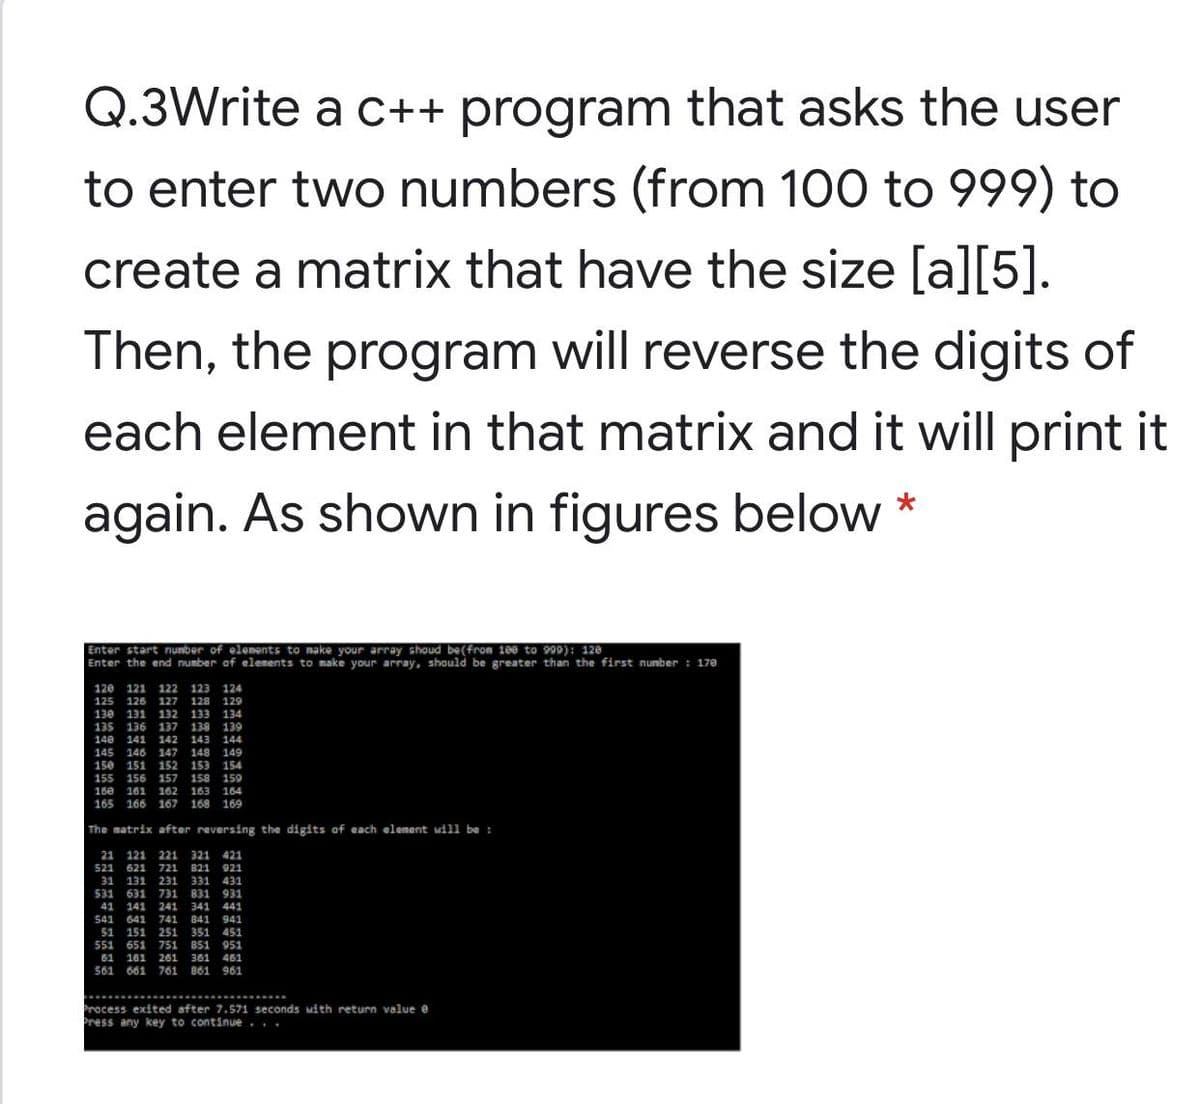 Q.3Write a c++ program that asks the user
to enter two numbers (from 100 to 999) to
create a matrix that have the size [a][5].
Then, the program will reverse the digits of
each element in that matrix and it will print it
again. As shown in figures below
Enter start nunber of elements to nake your array shoud be(from 188 to 999): 128
Enter the end number of elenents to make your array, should be greater than the first nunber : 170
120 121 122 123 124
125 126 127 128
129
130 131 132 133 134
135
136 137 13a 139
140
141 142
143
144
145 146 147
148 149
156
155
151 152 153 154
156
157 158 159
162 163 164
165 166 167 168 169
160 161
The matrix after reversing the digits af each element will be :
21 121 221 321
521 621 721 821 921
31 131 231 331
421
431
531 631 731 831 931
41 141 241 341 441
541 641 741 841 941
51 151 251 351 451
551 651 751 851 951
61 161 261 361 461
561 661 761 861 961
Process exited after 7.571 seconds Mith return value e
Press any key to continue...
